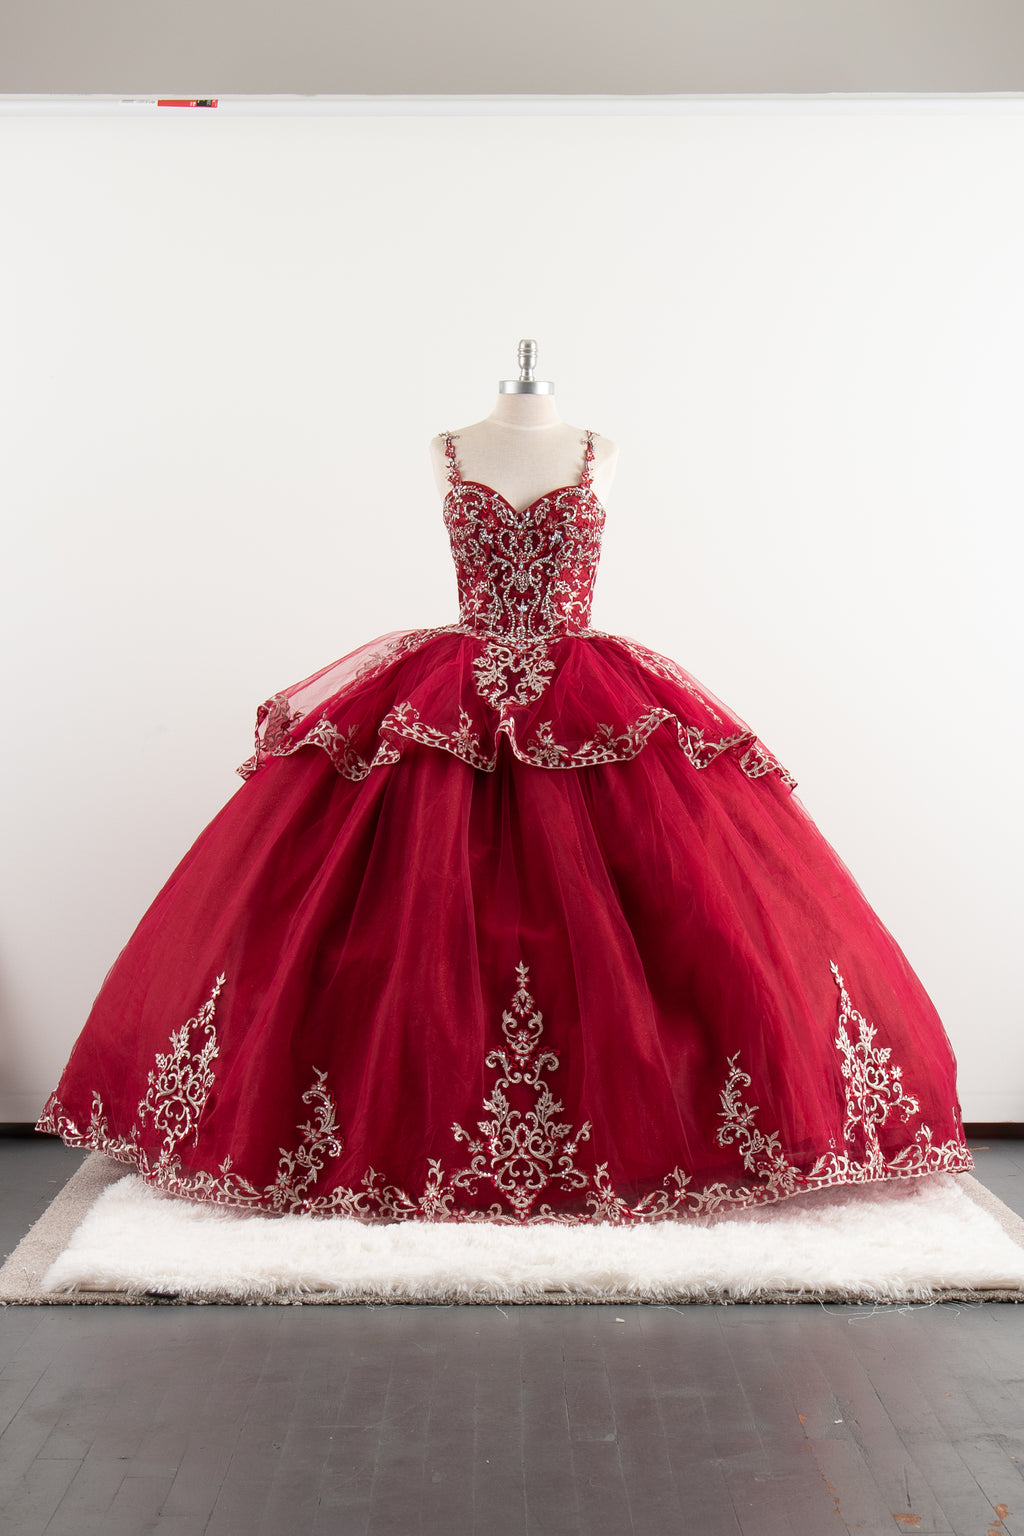 Red Quinceañera Sleeveless Dress opened back